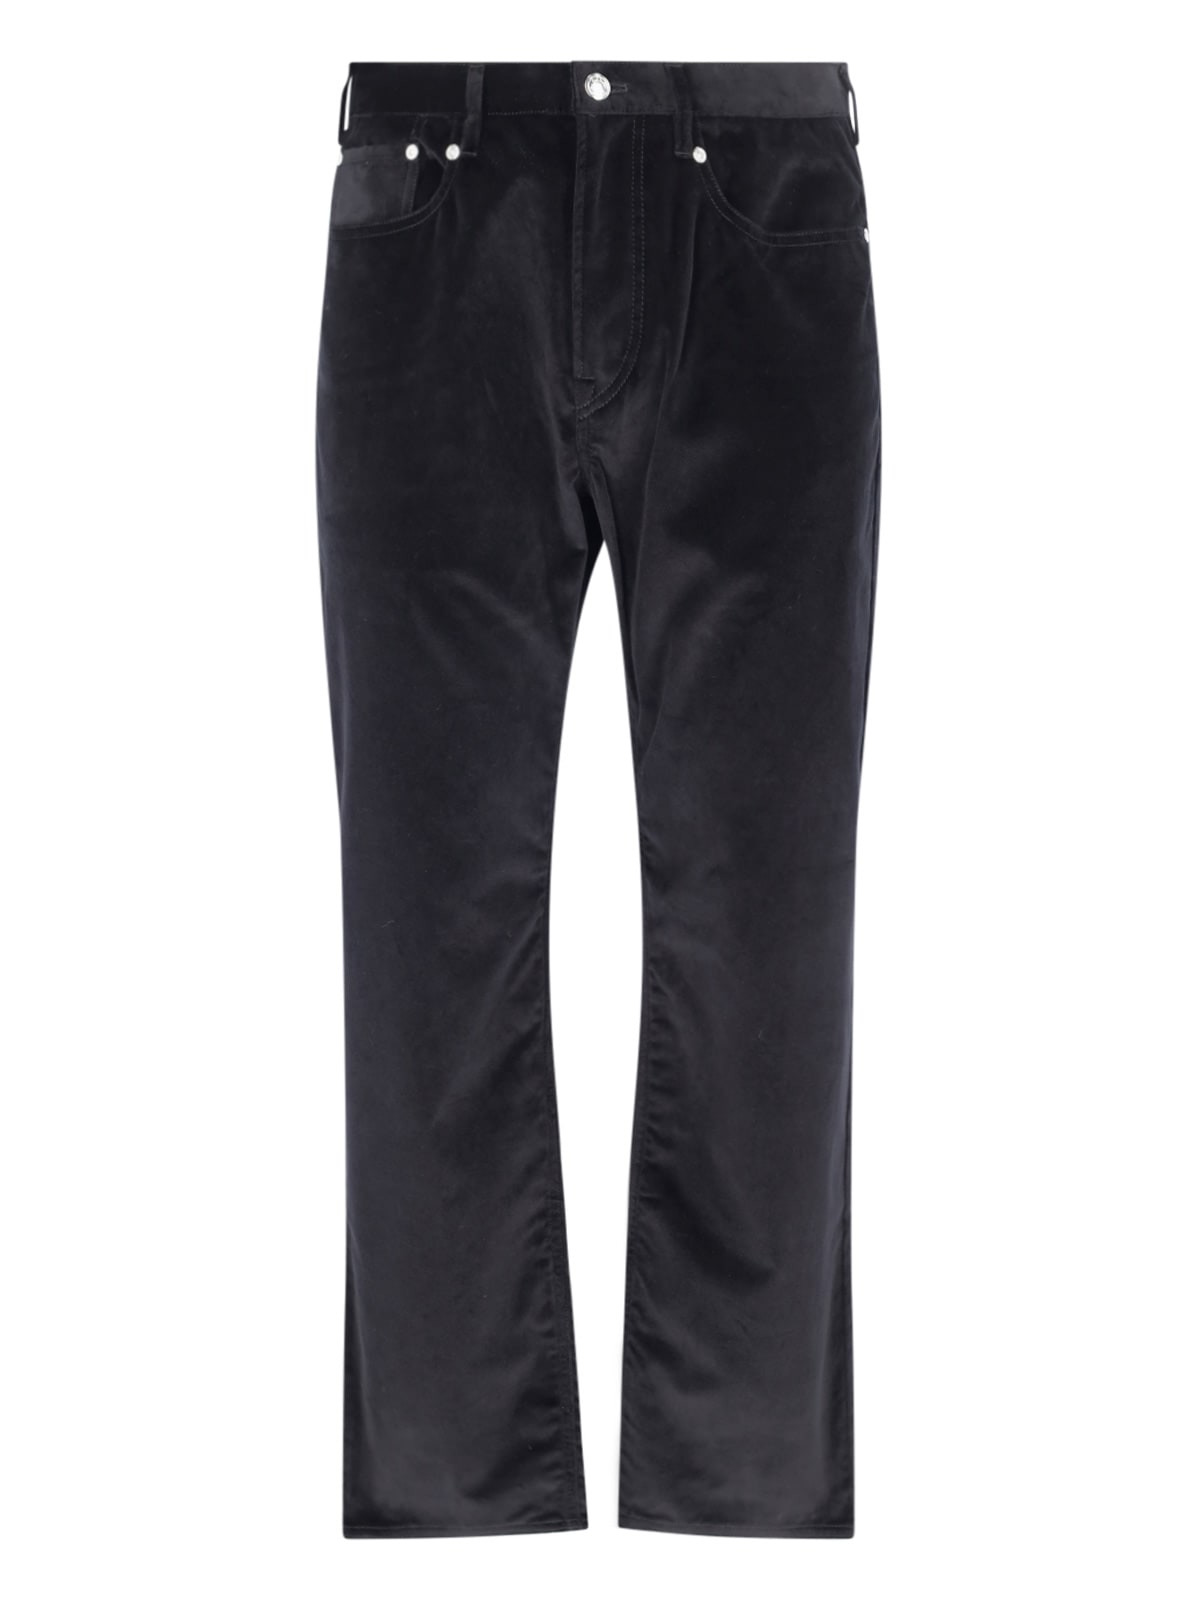 PAUL SMITH trousers